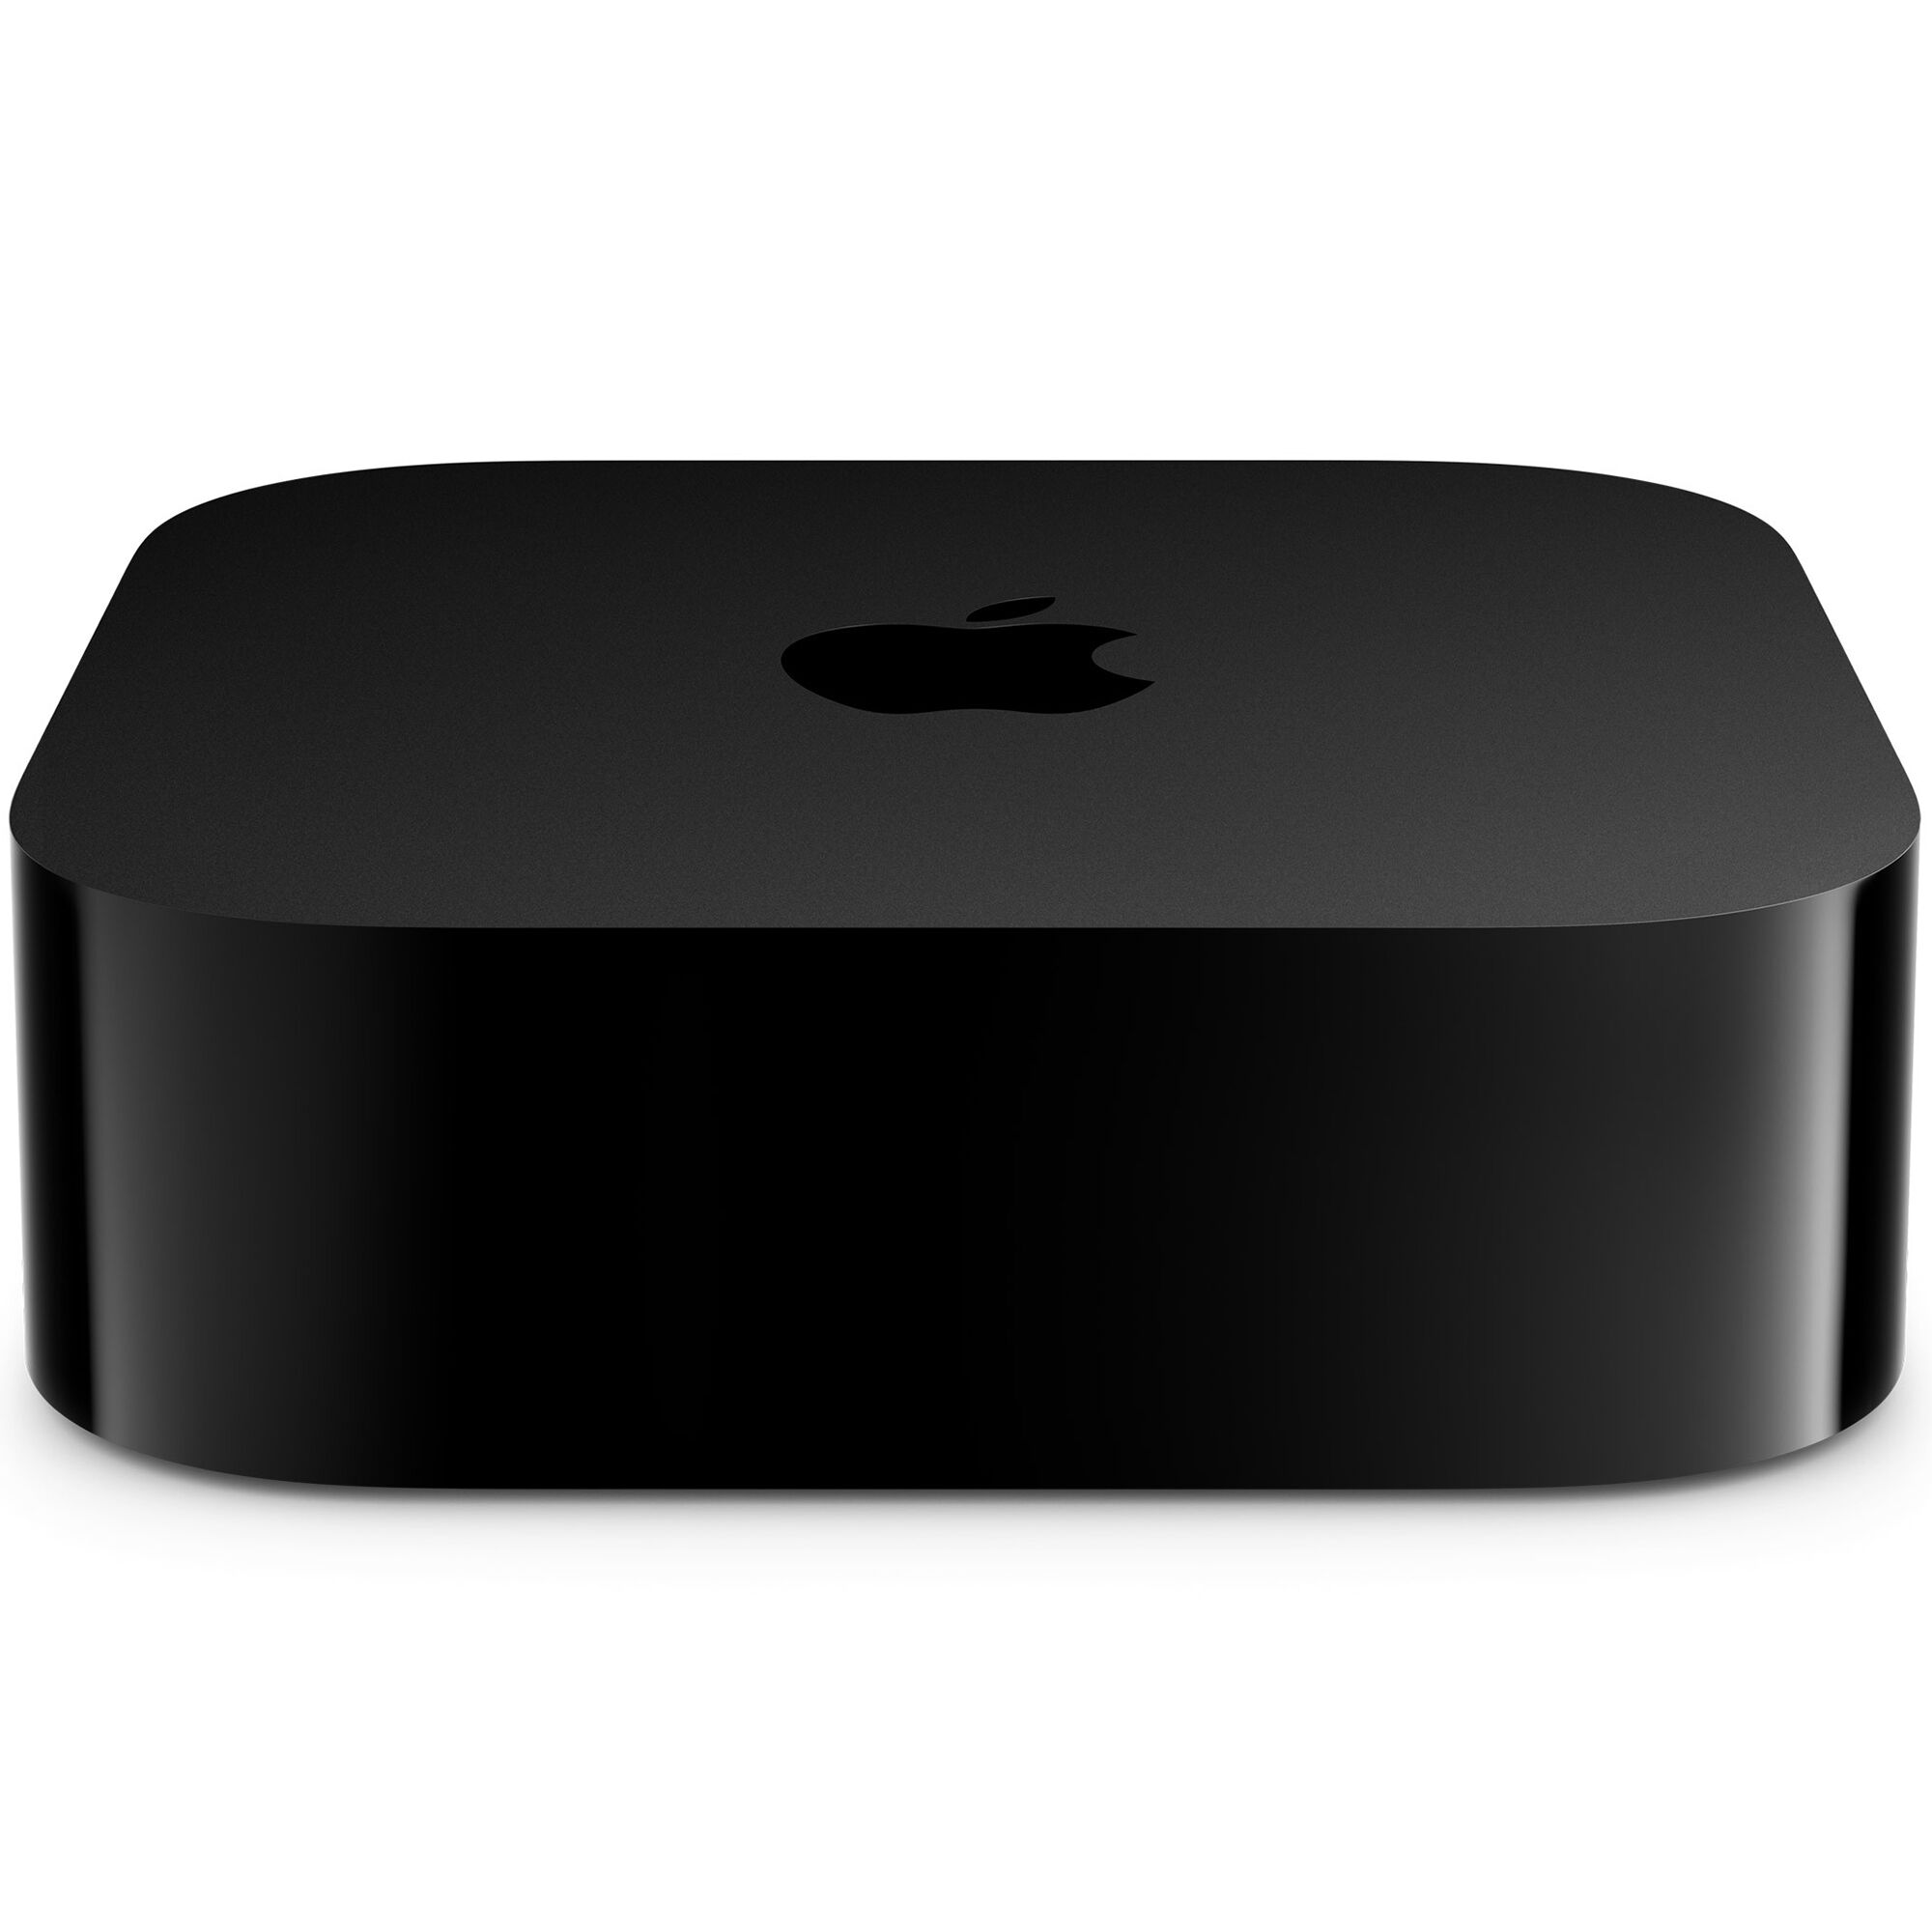 Apple TV 4K, 128GB, Wifi + Ethernet with Thread Networking support